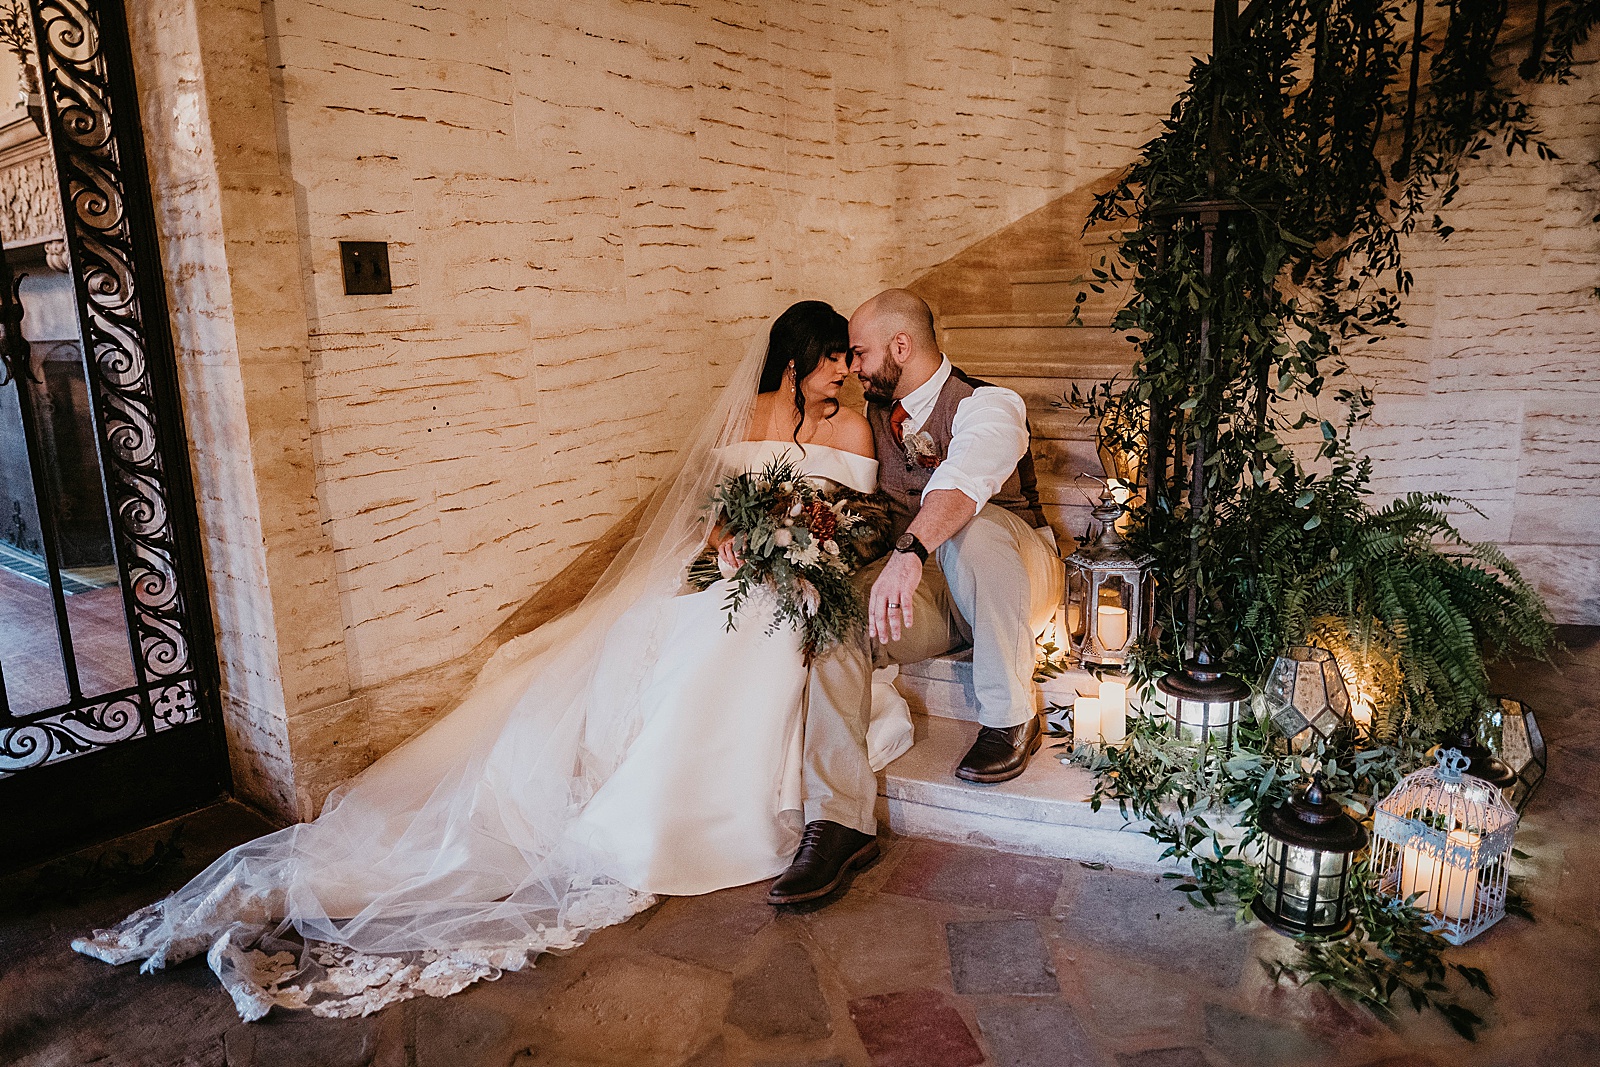 Romantic Howey Mansion South Florida Wedding captured by South Florida Wedding Photographer, Krystal Capone Photography